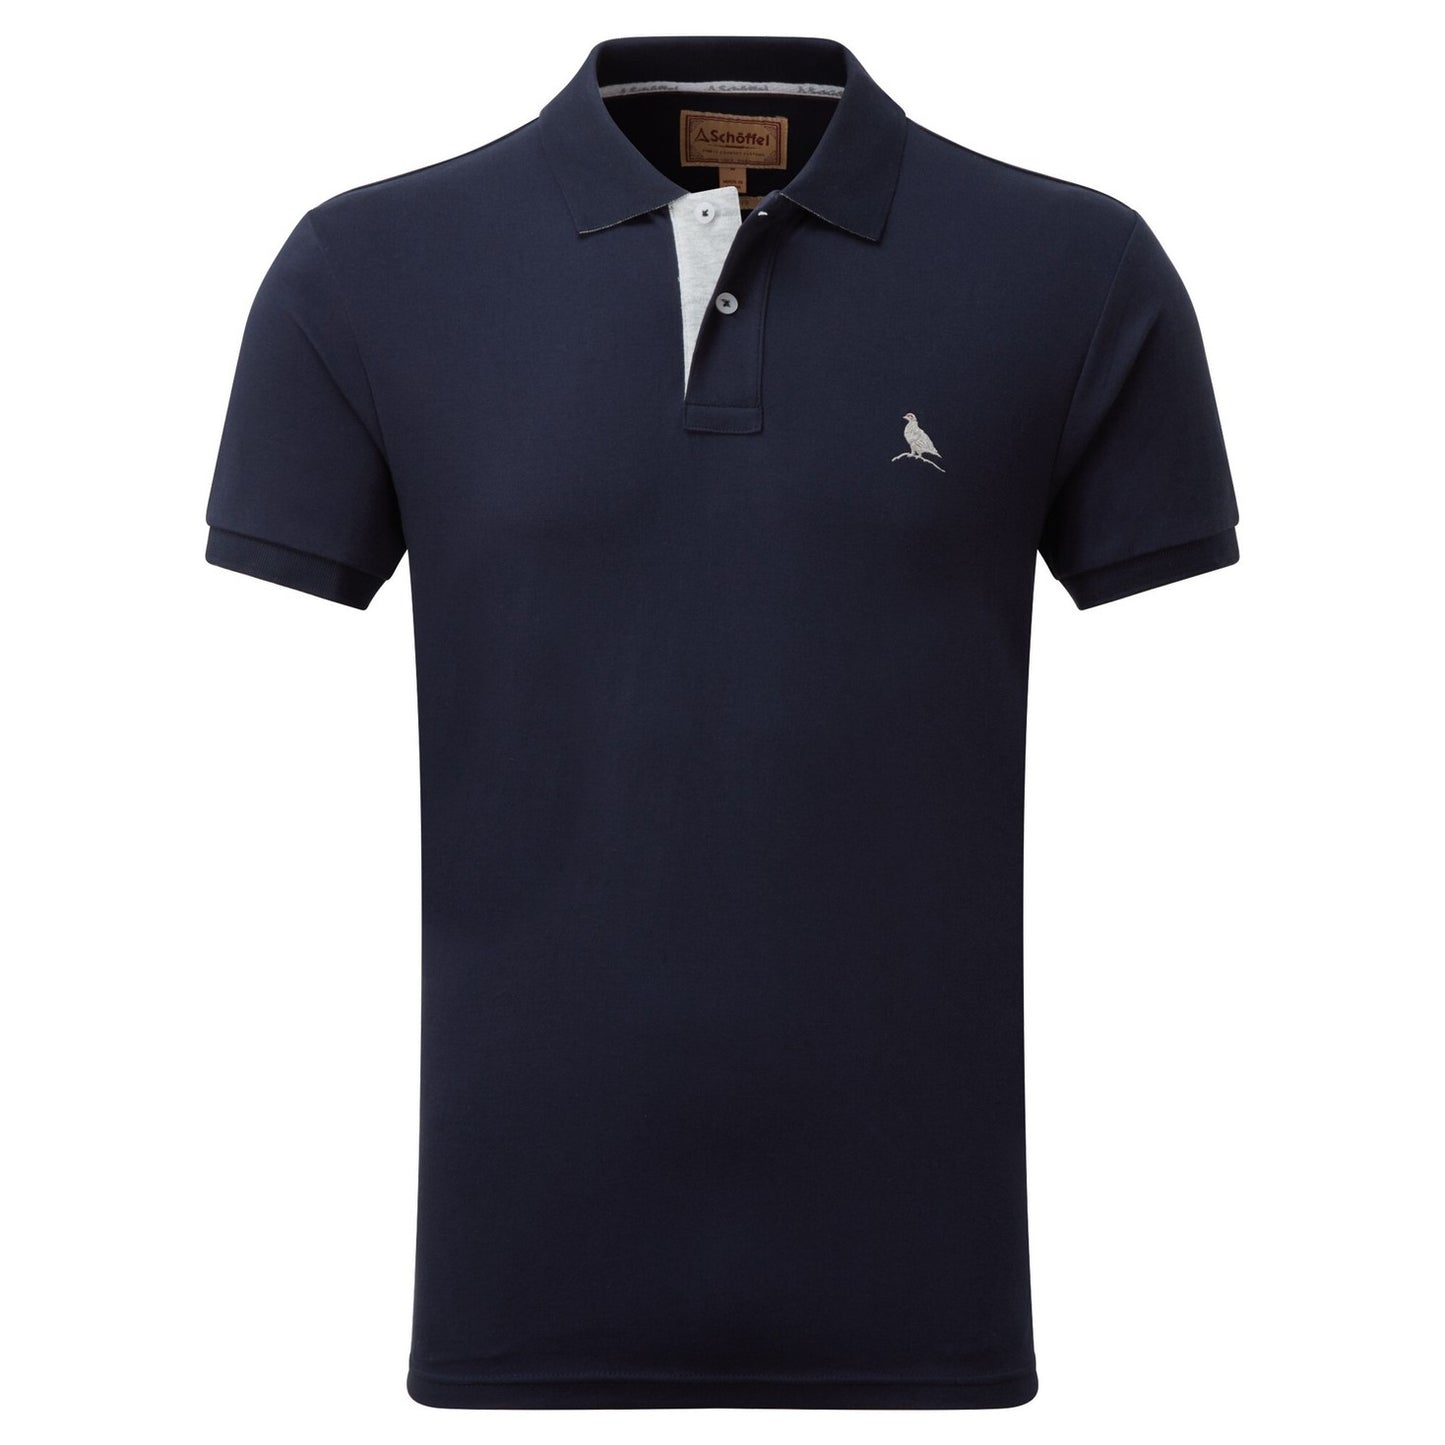 Schoffel Polo Shirts, the St Ives Jersey Polo